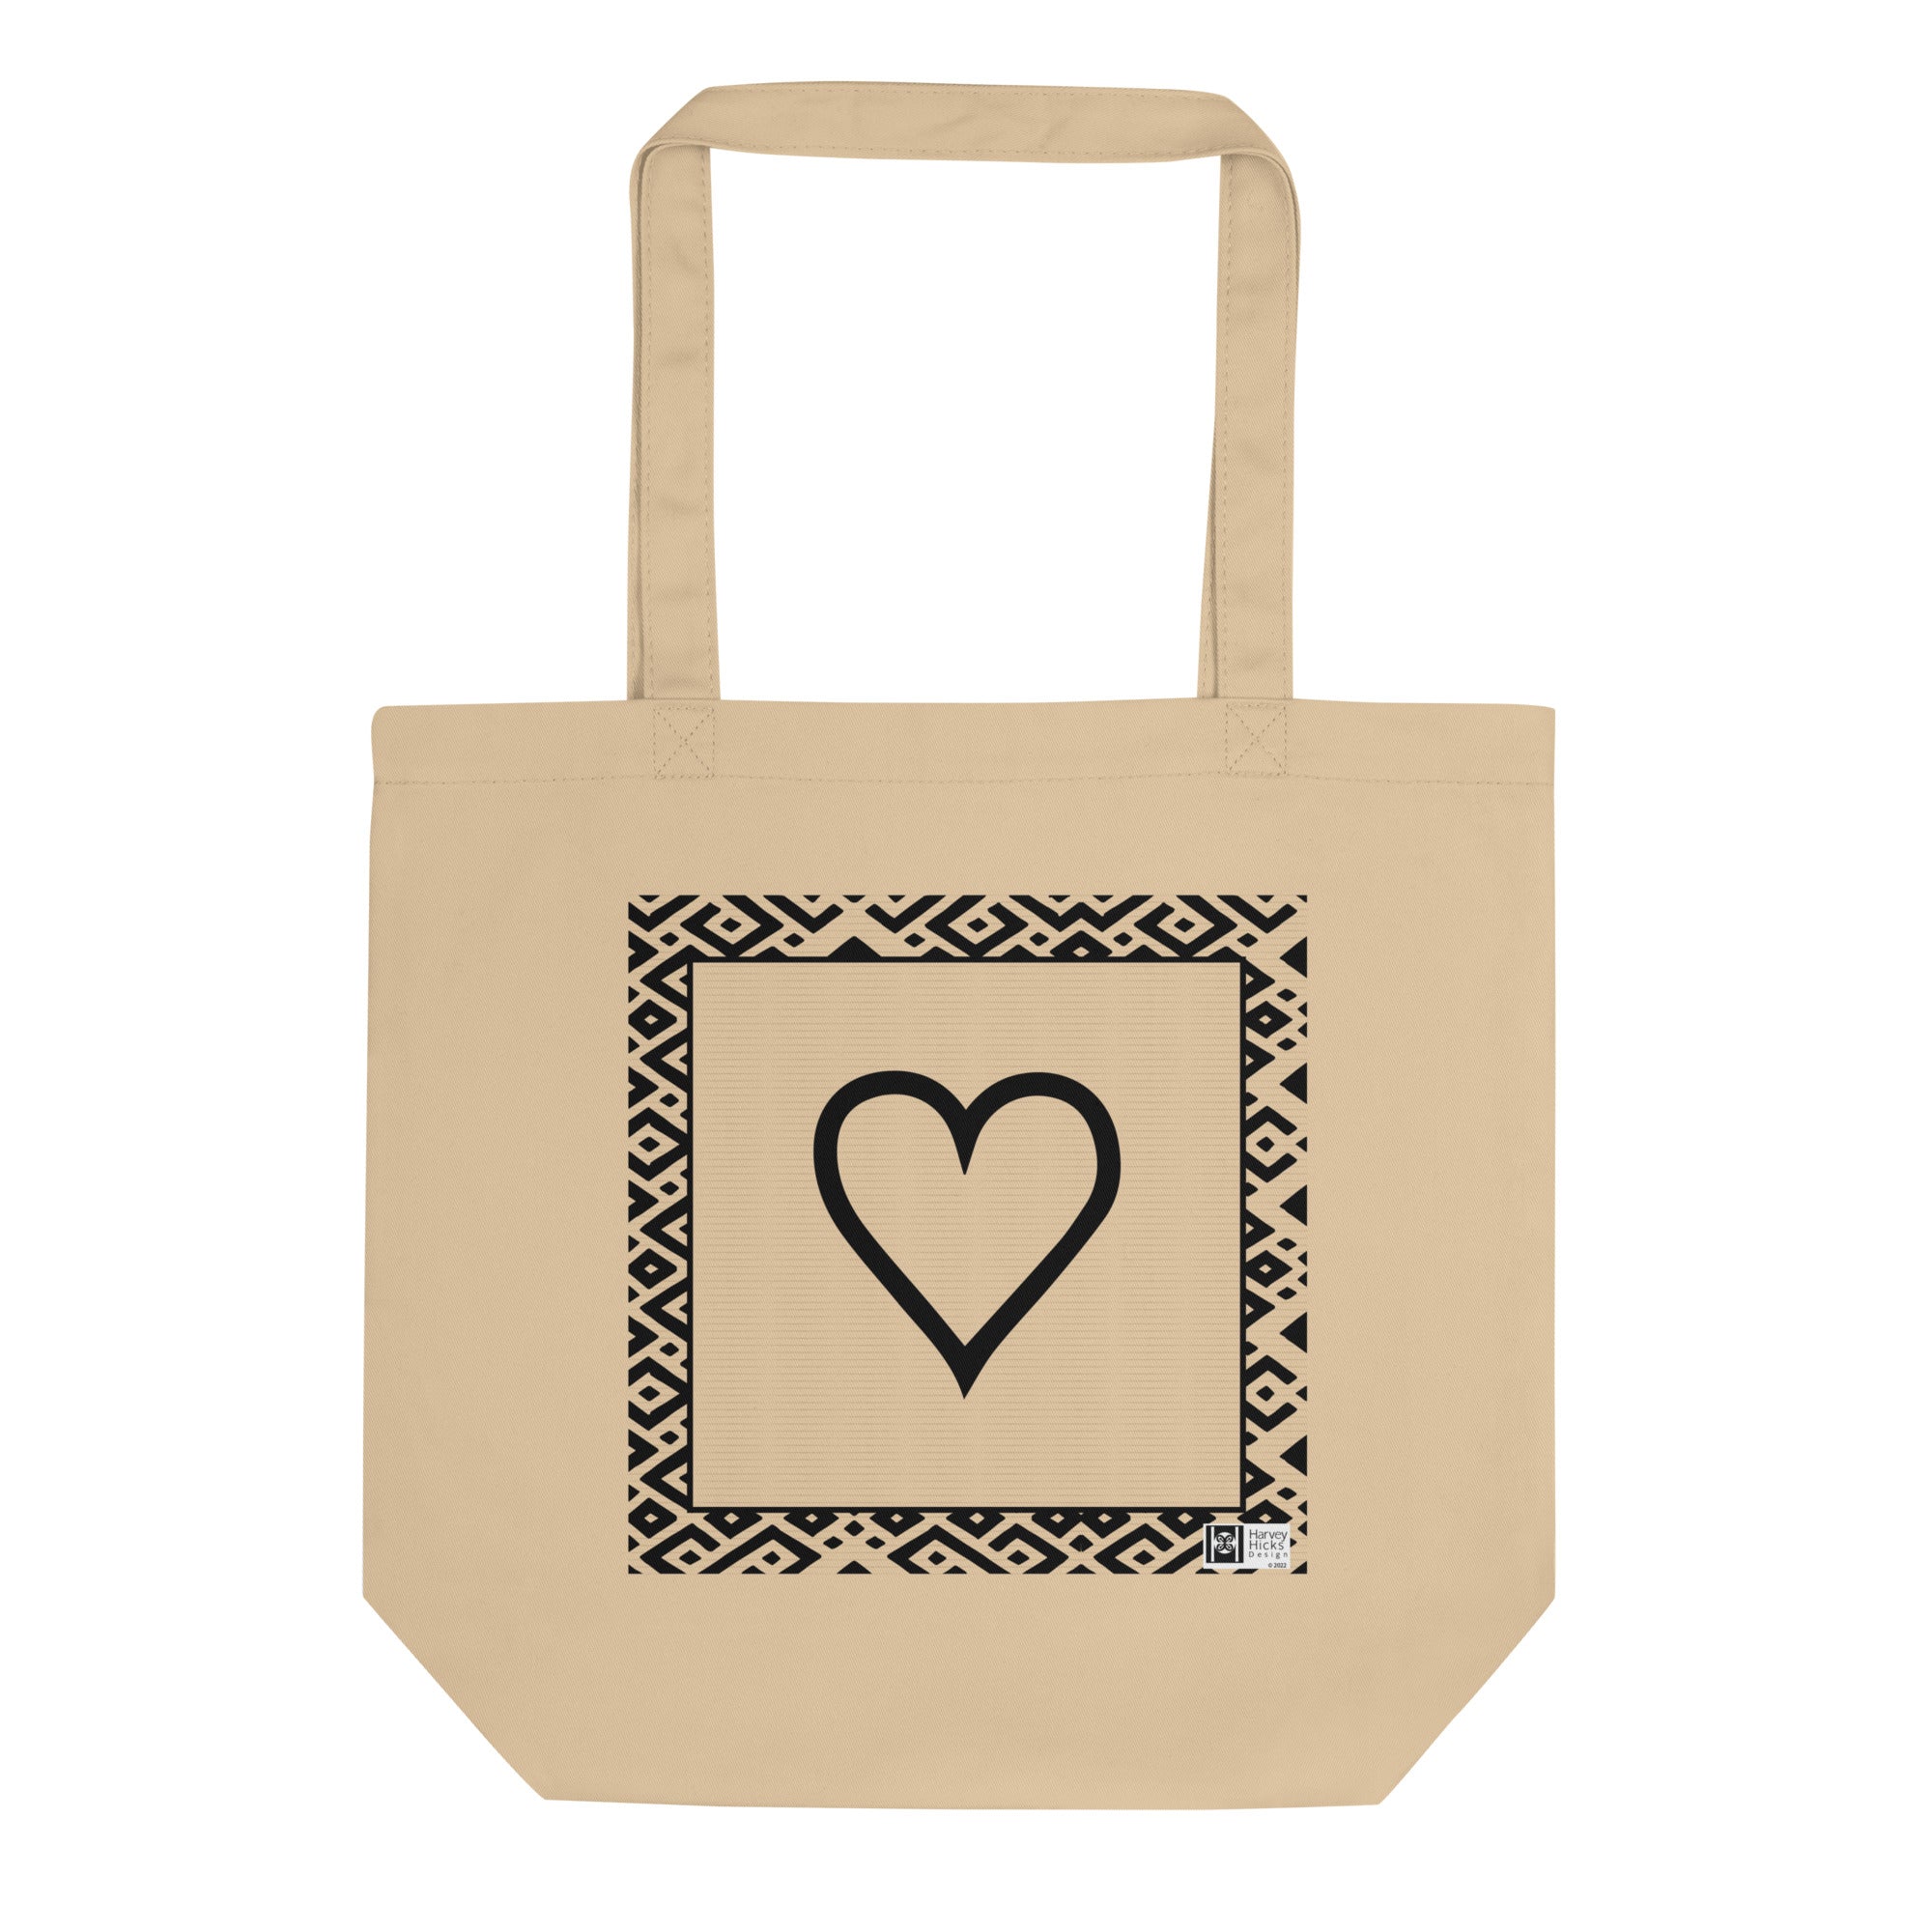 100% cotton Eco Tote Bag, featuring the Adinkra symbol for good will, NO TEXT